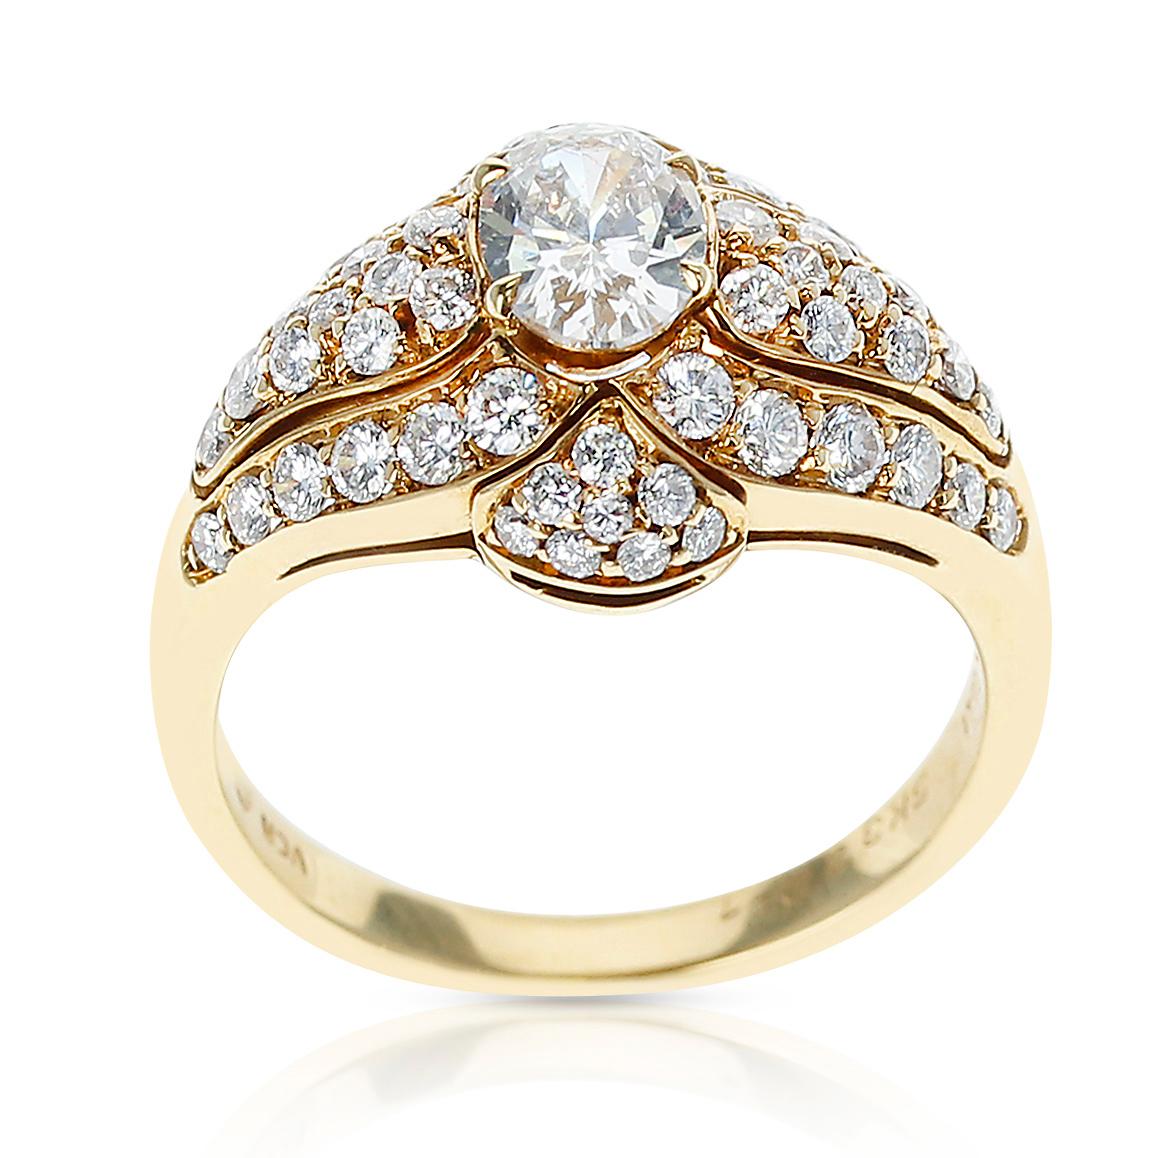 A Van Cleef & Arpels Oval Diamond Ring accented with Diamonds on the mounting made in 18 Karat Yellow Gold. The center diamond is approximately 0.55 carats. Ring Size US 6.25. Total Weight: 5.37 grams. 

